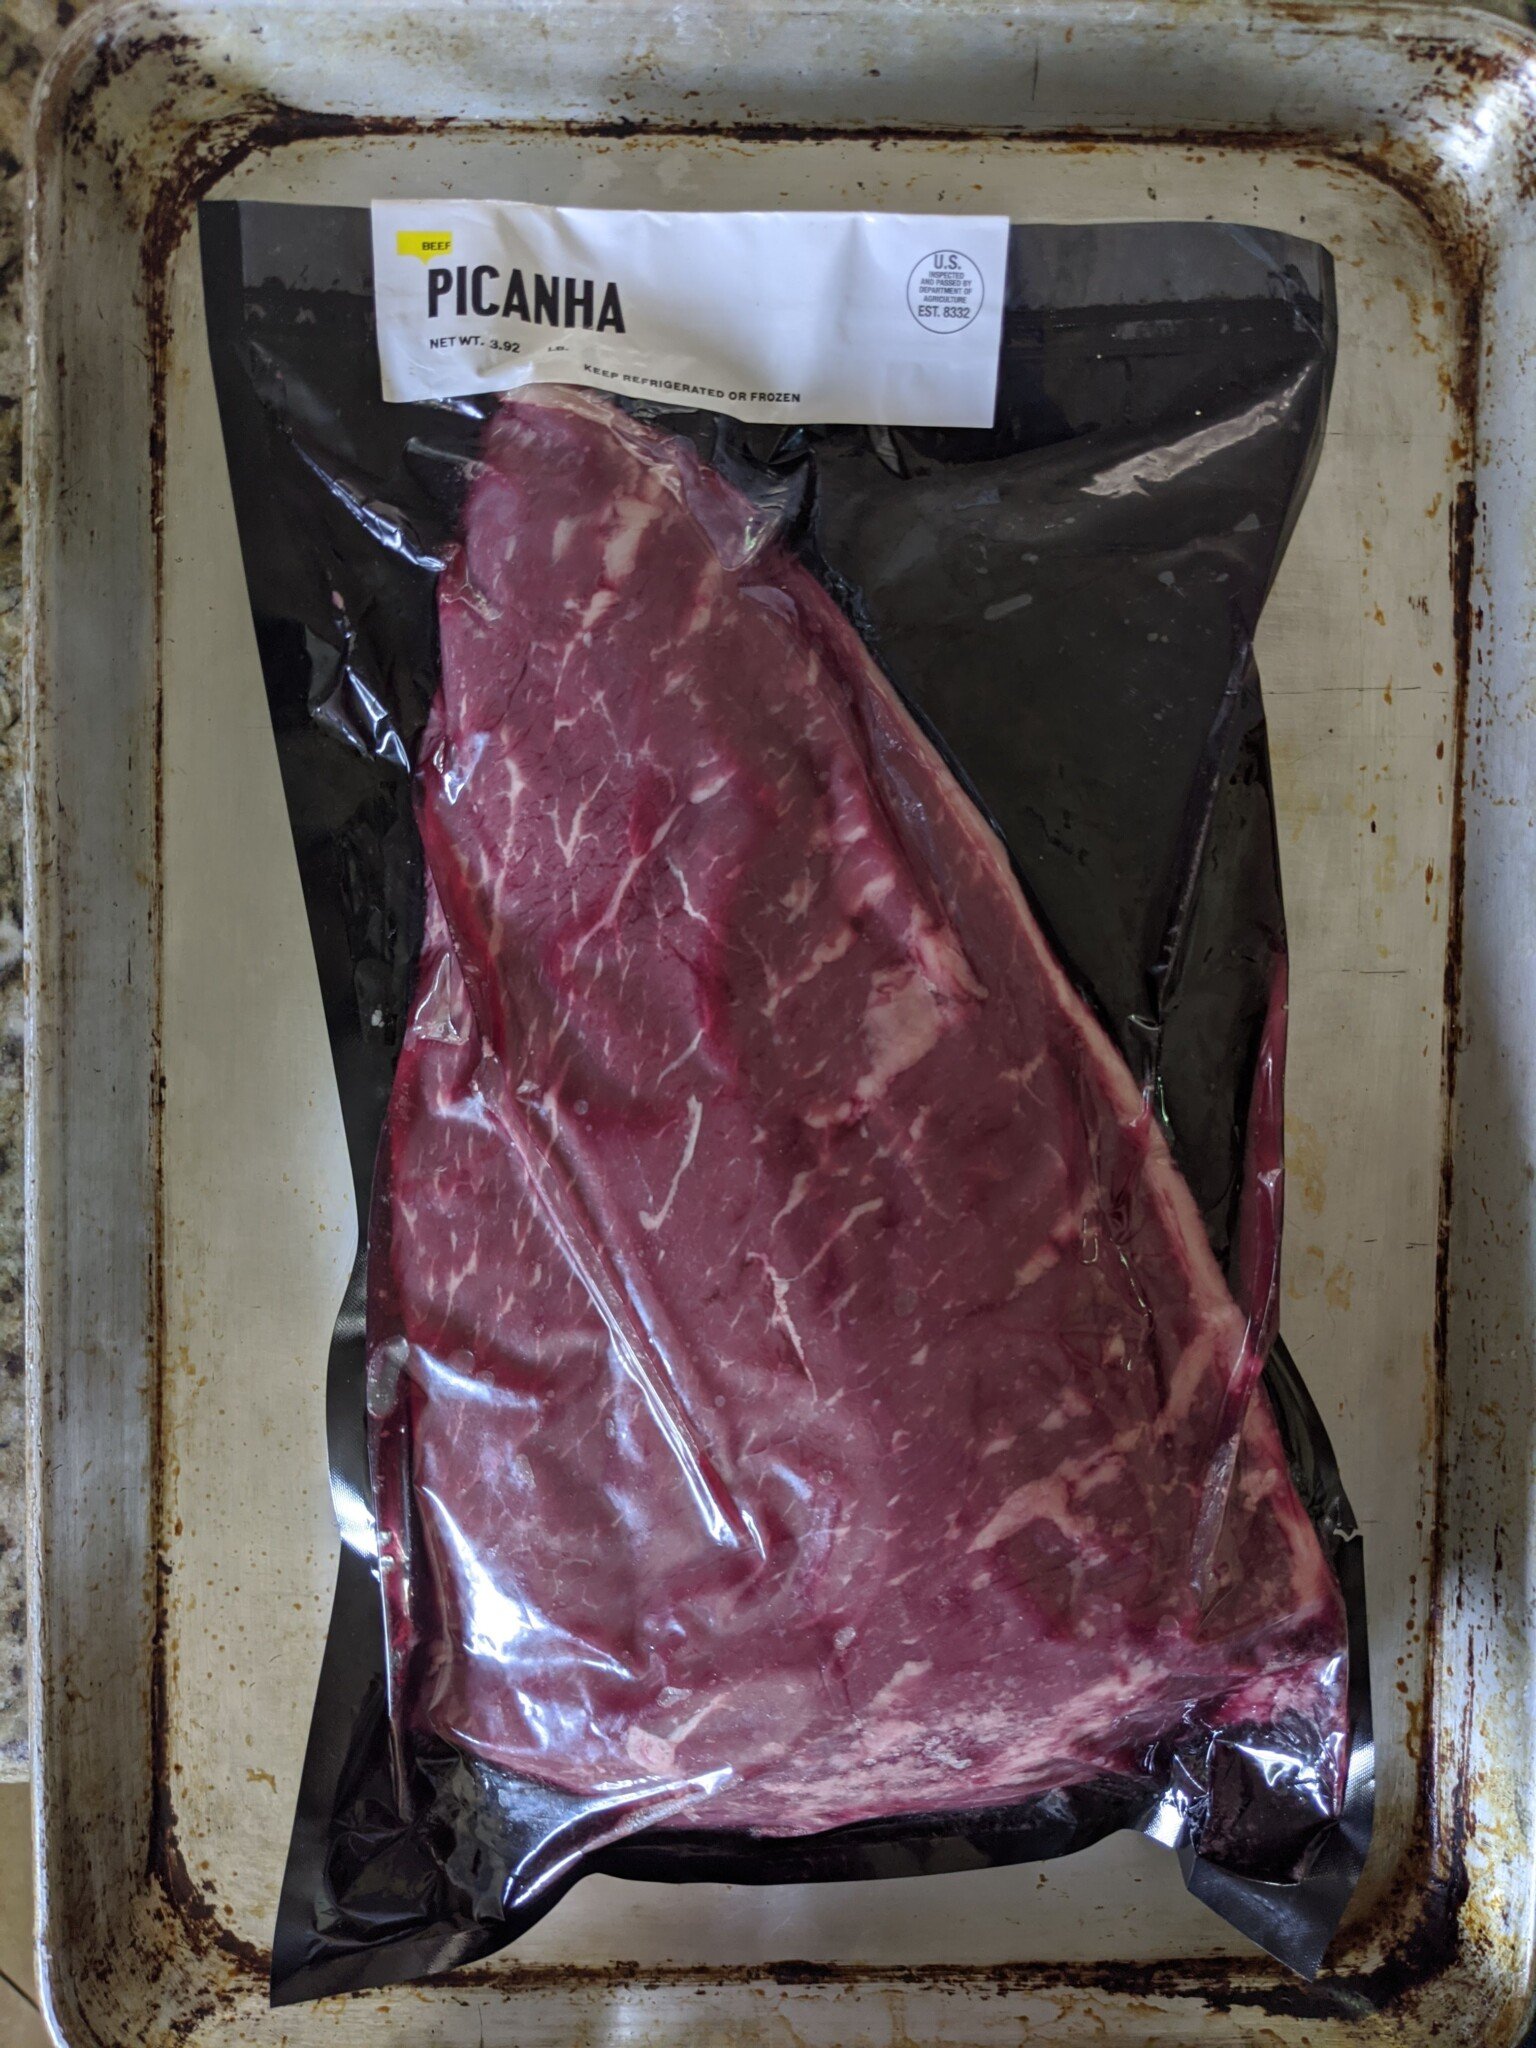 A picanha, a beef cut around 4 pounds from the top sirloin, also known as coulotte. A cut typically known for grilling churrasco style